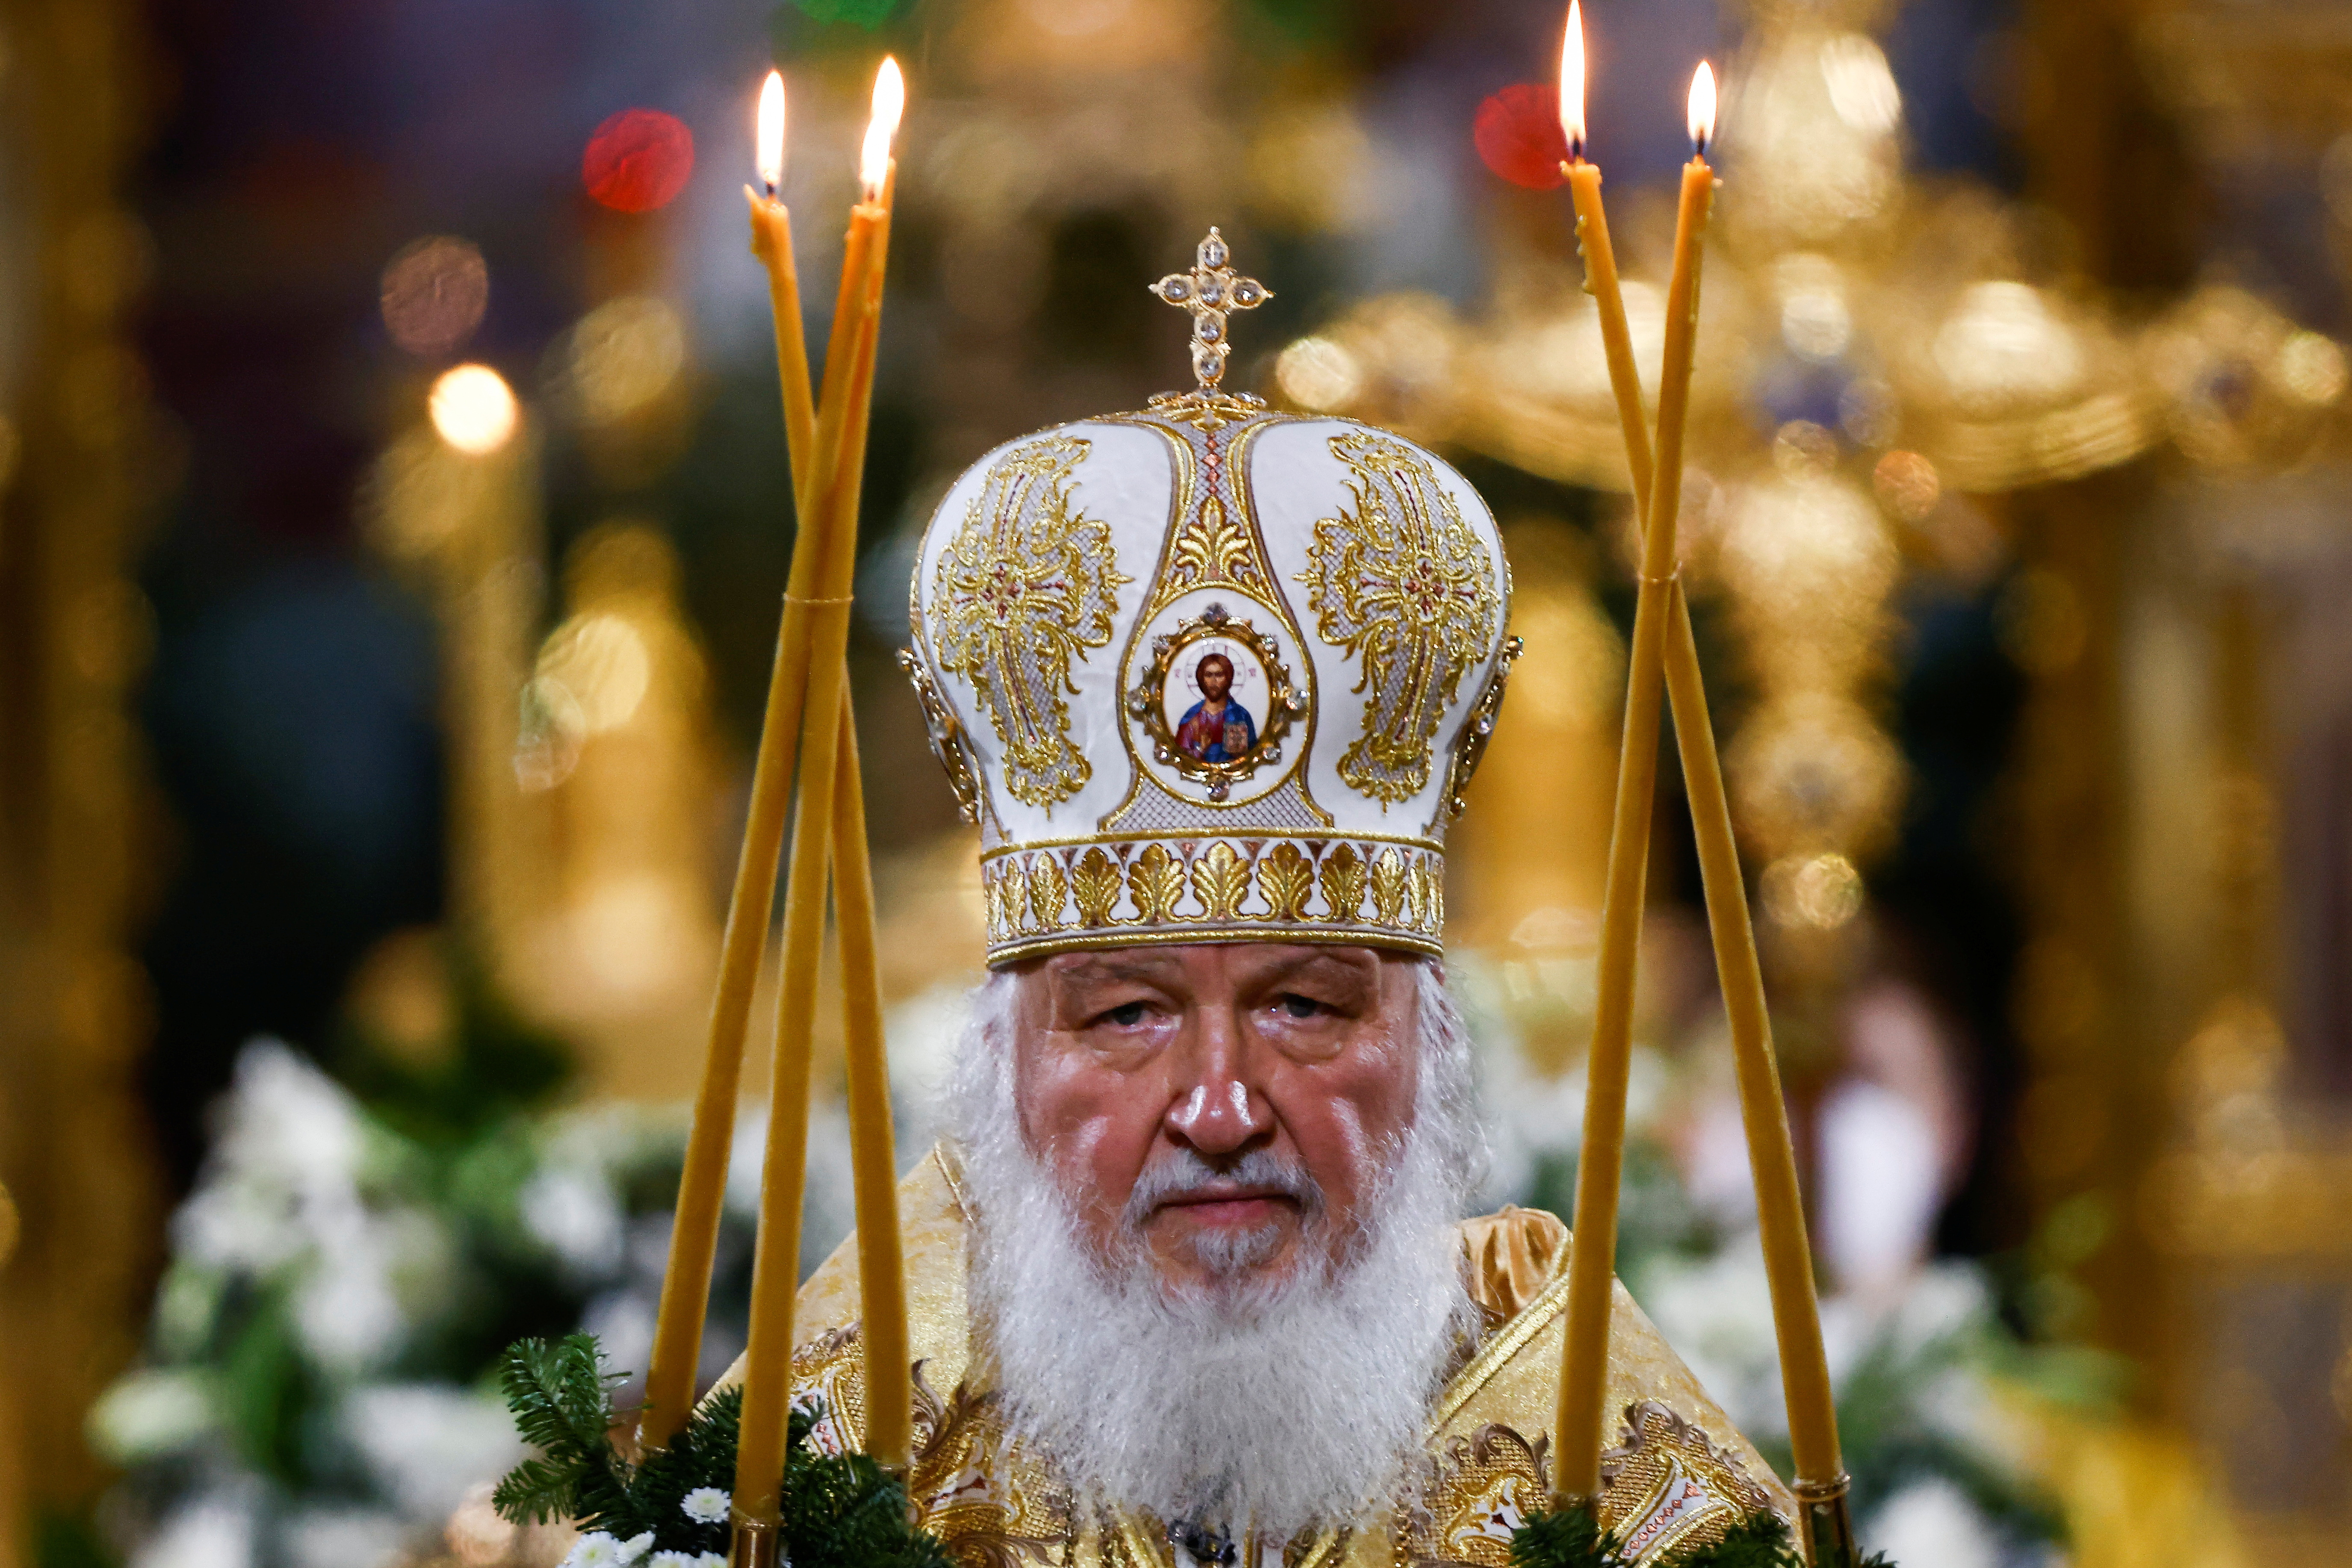 Orthodox Christmas service at the Cathedral of Christ the Saviour in Moscow